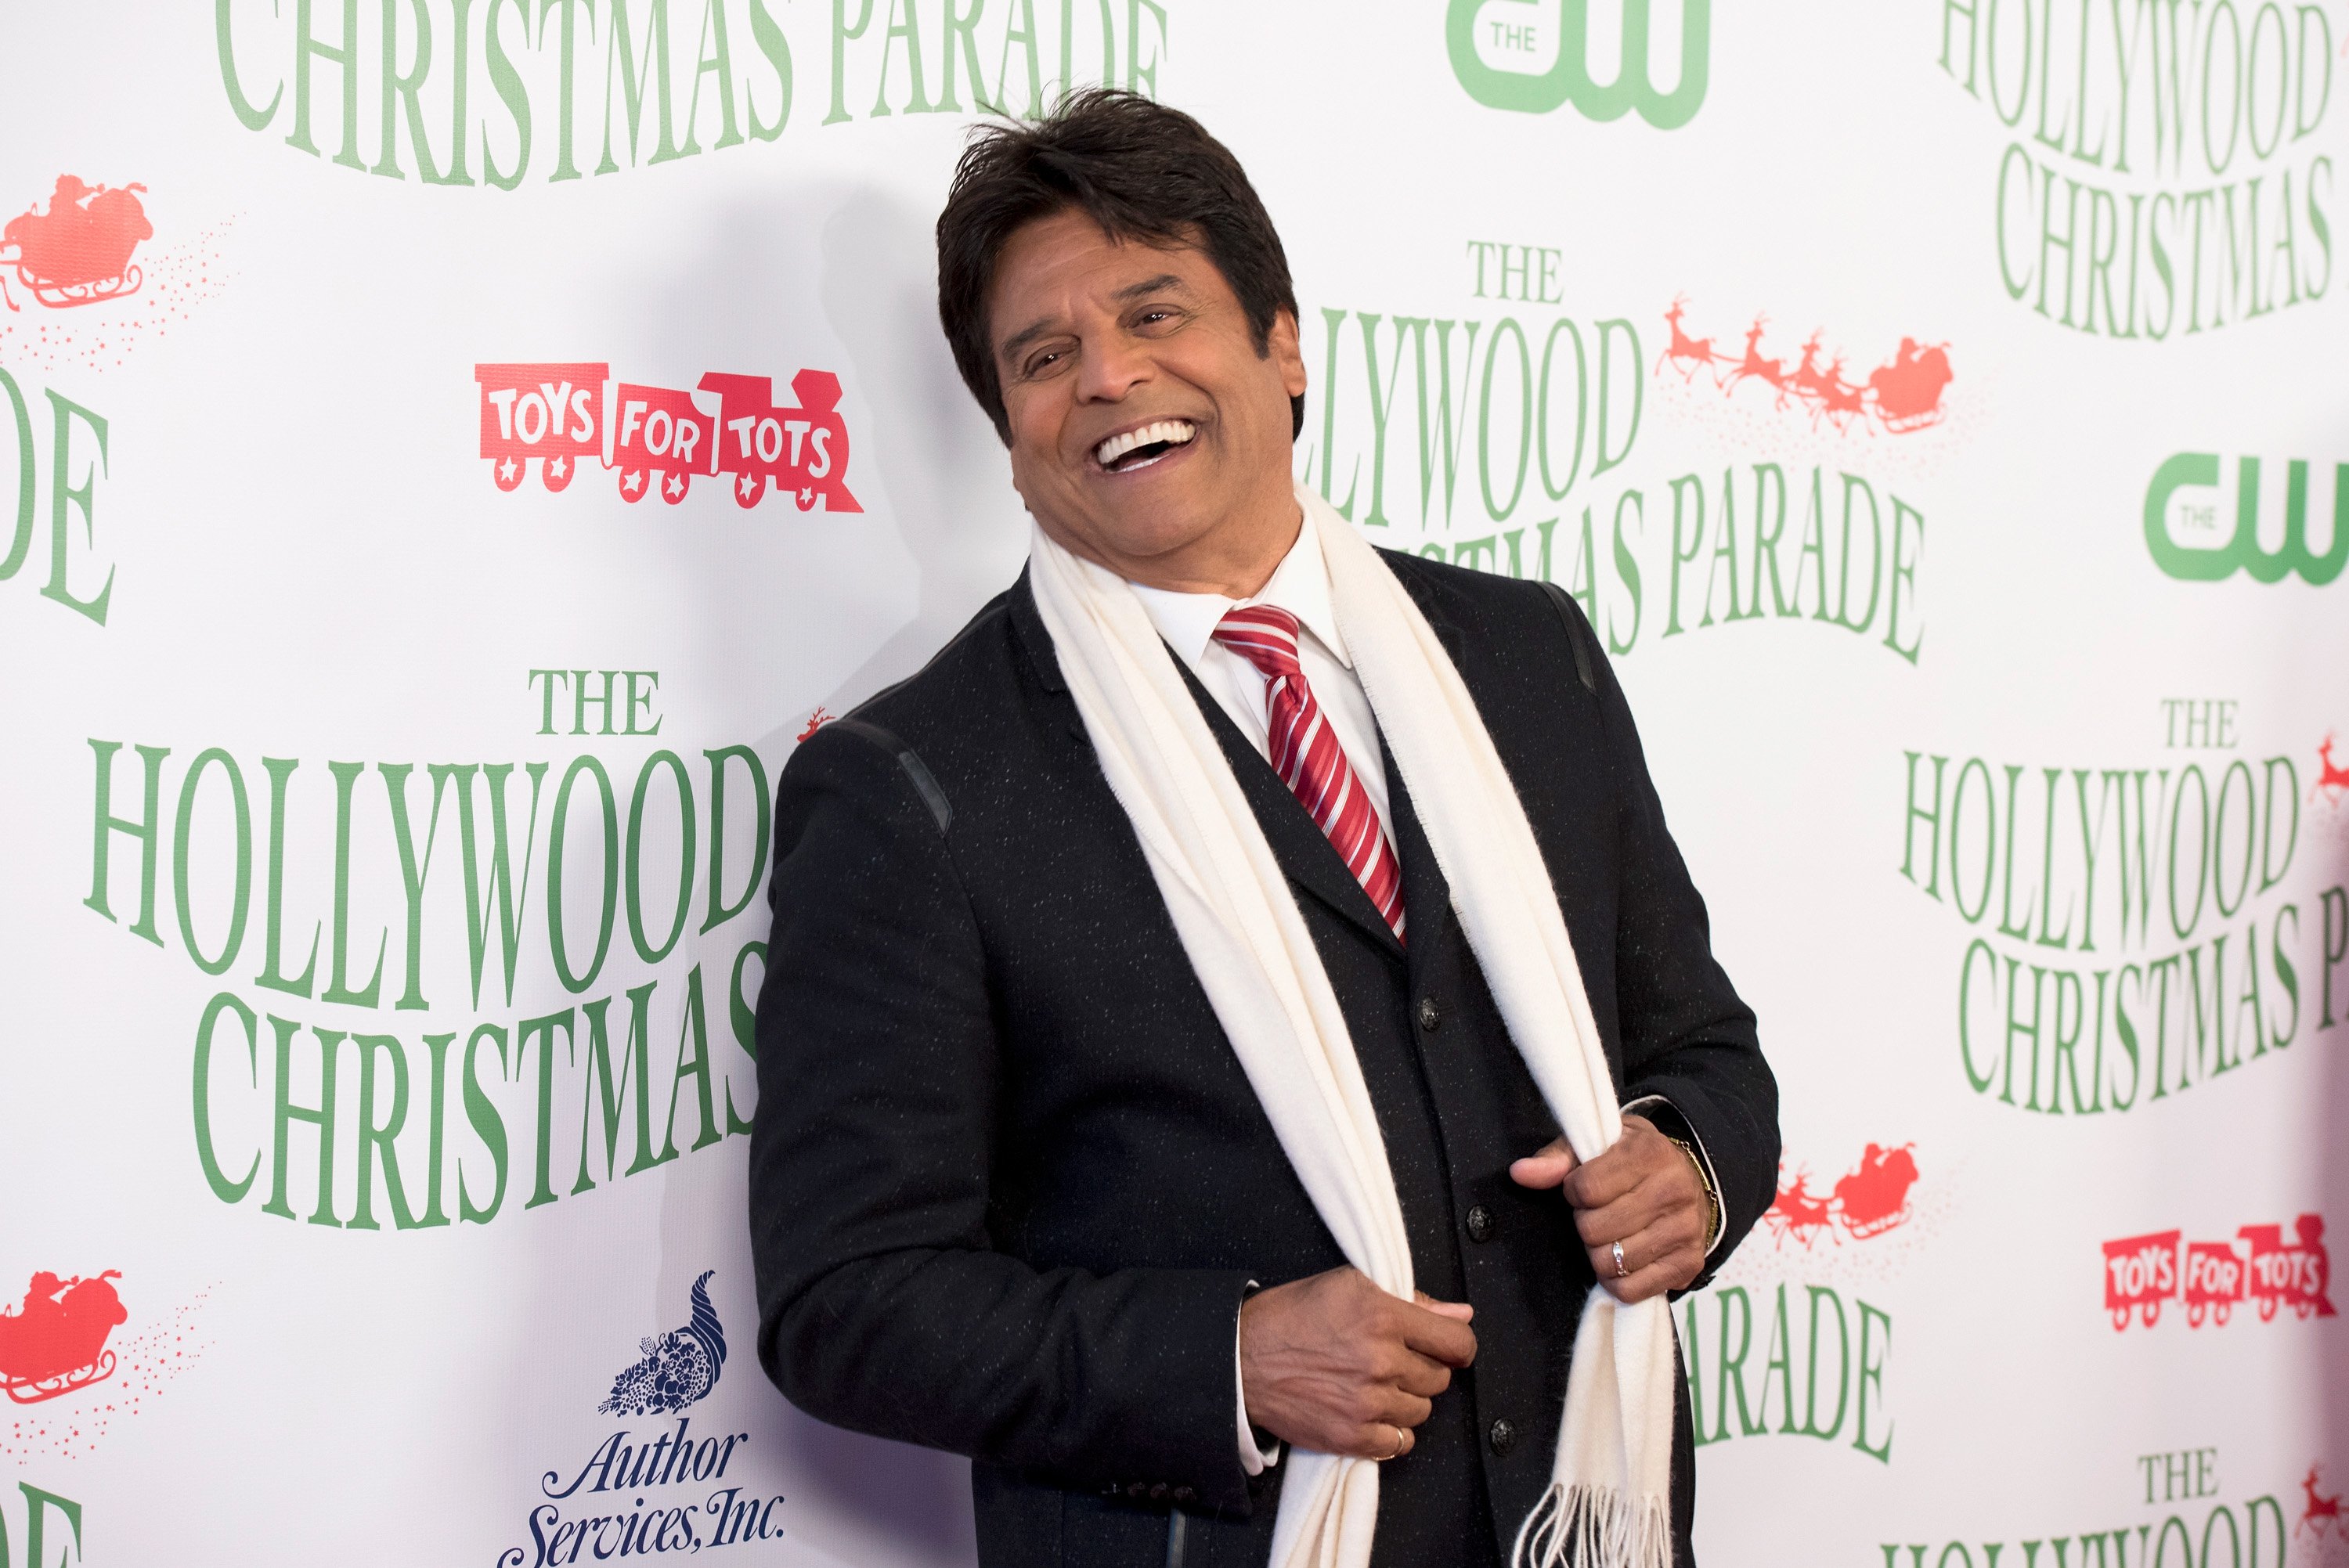 Erik Estrada poses for a picture at the 85th Annual Hollywood Christmas Parade on November 27, 2016 | Source: Getty Images